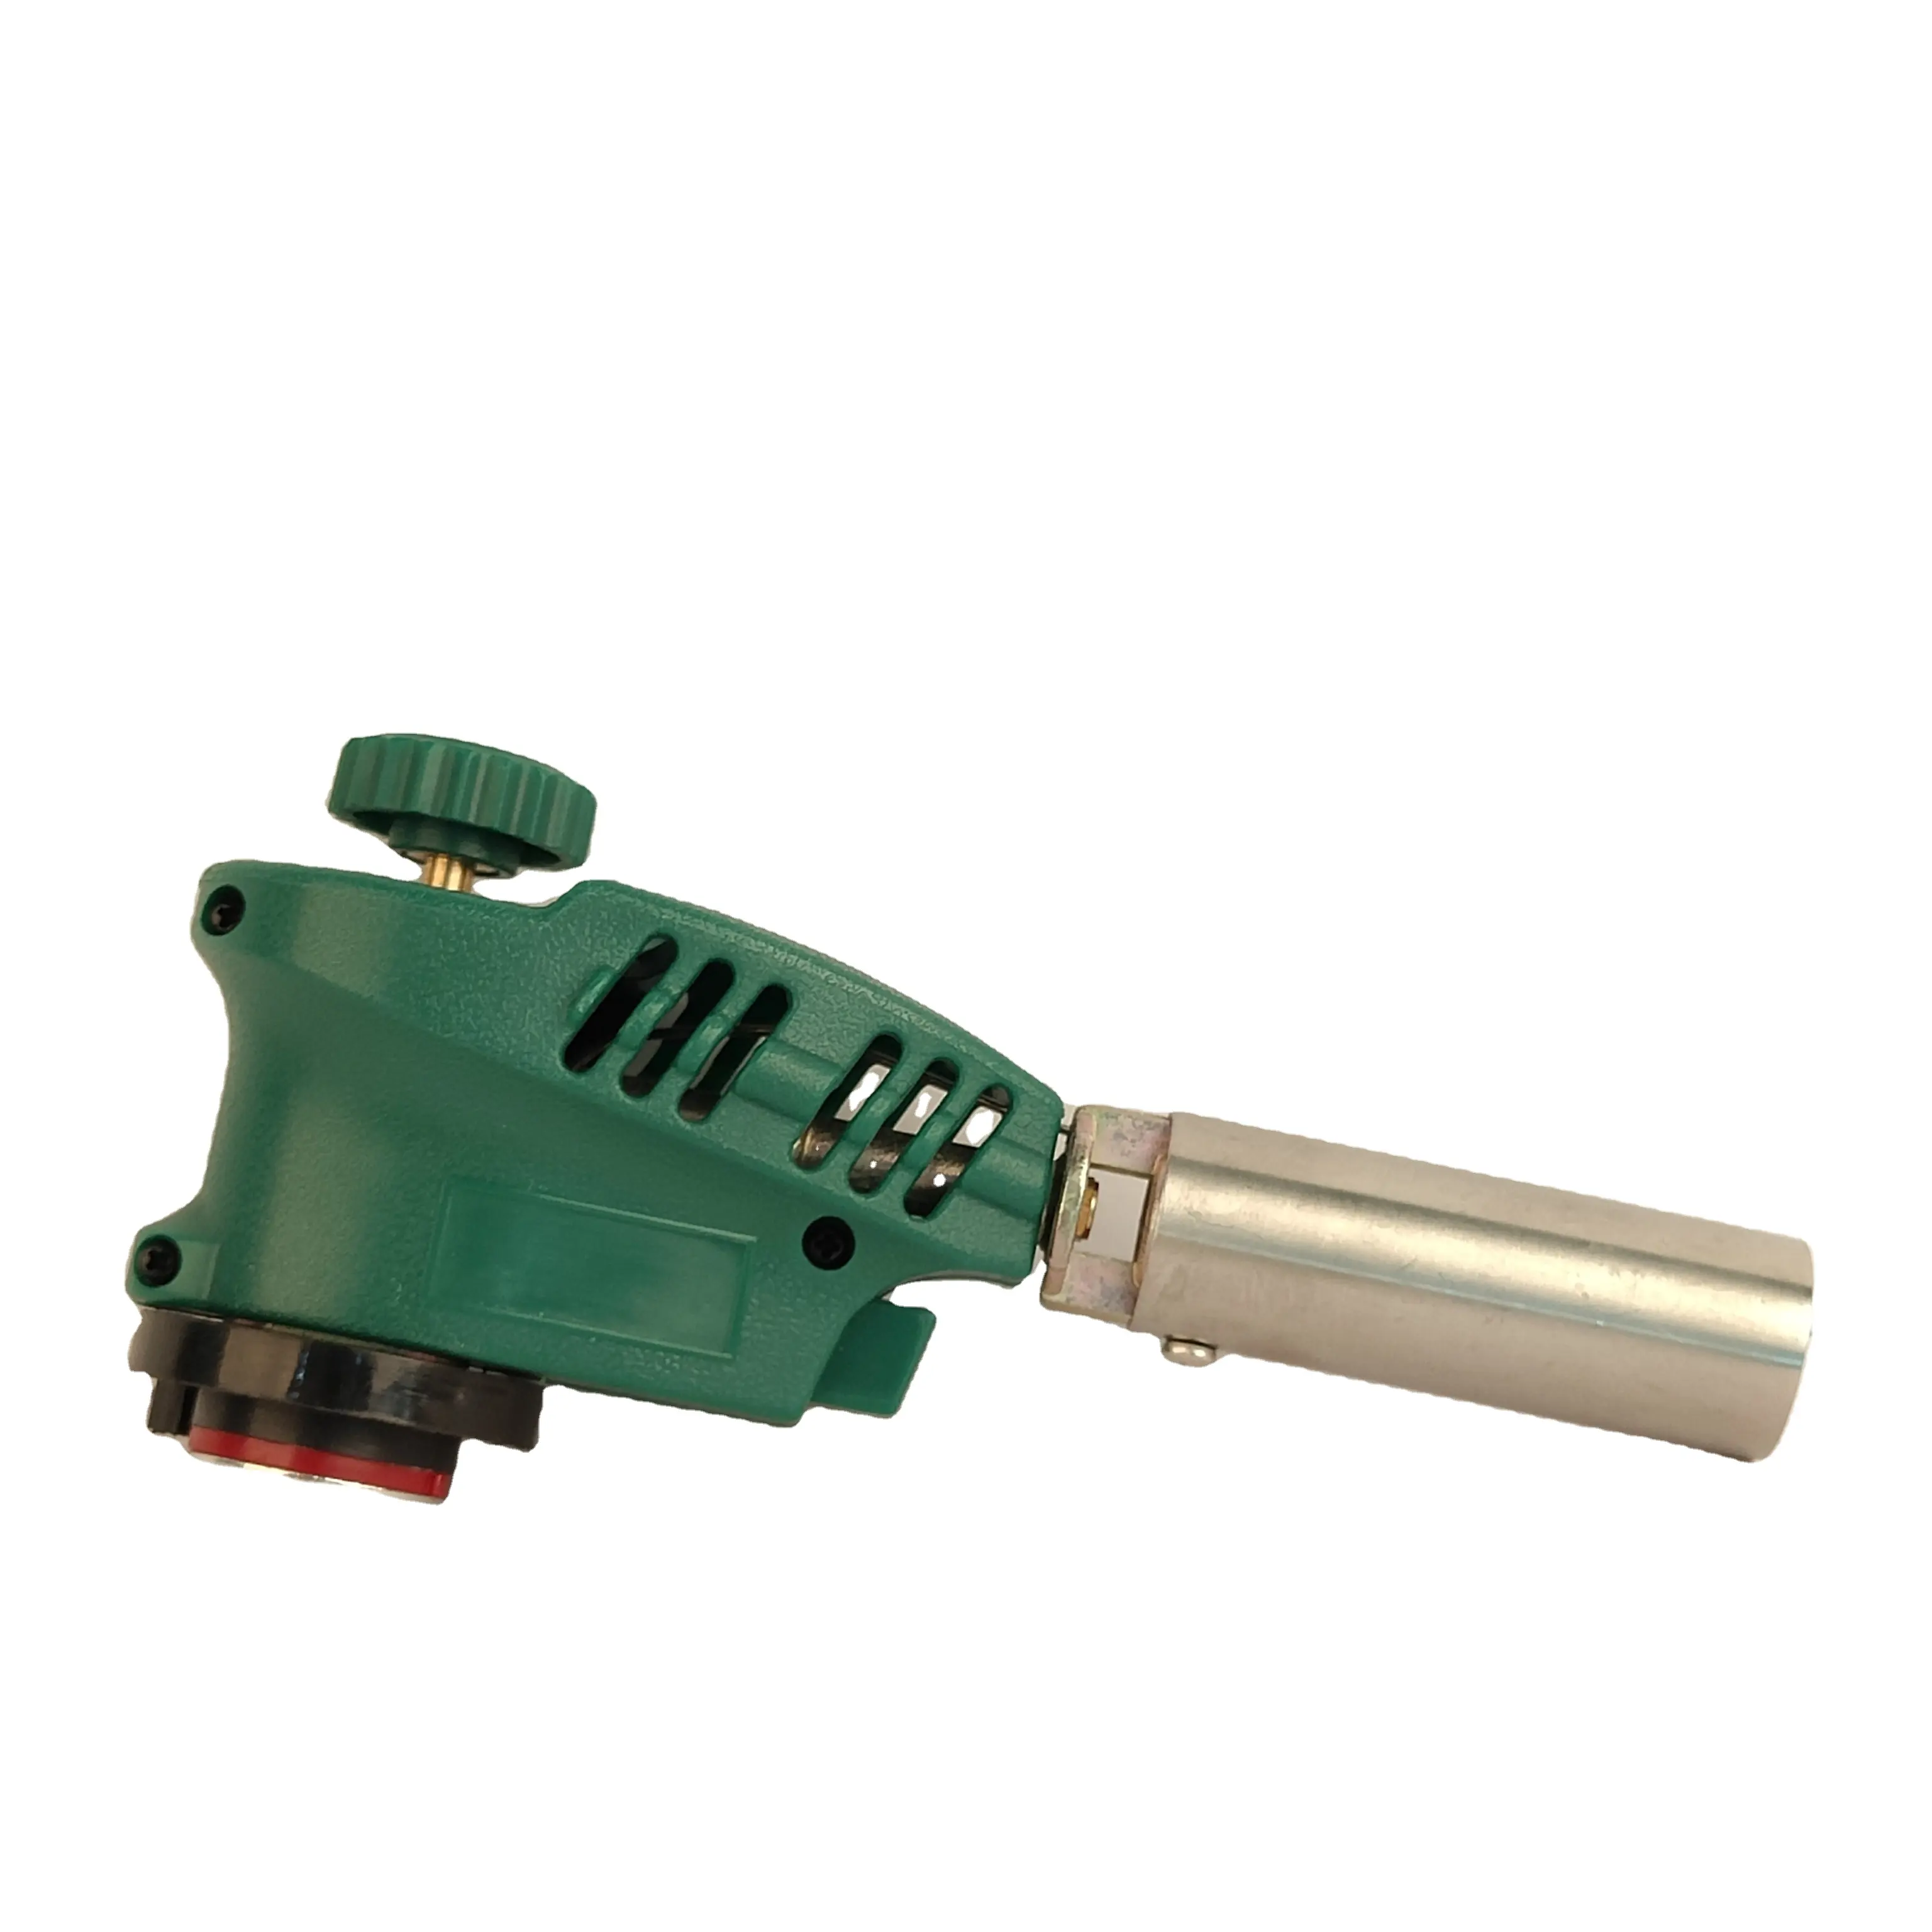 Green color hand-operated blow gun camping gas torch hiking flame gun